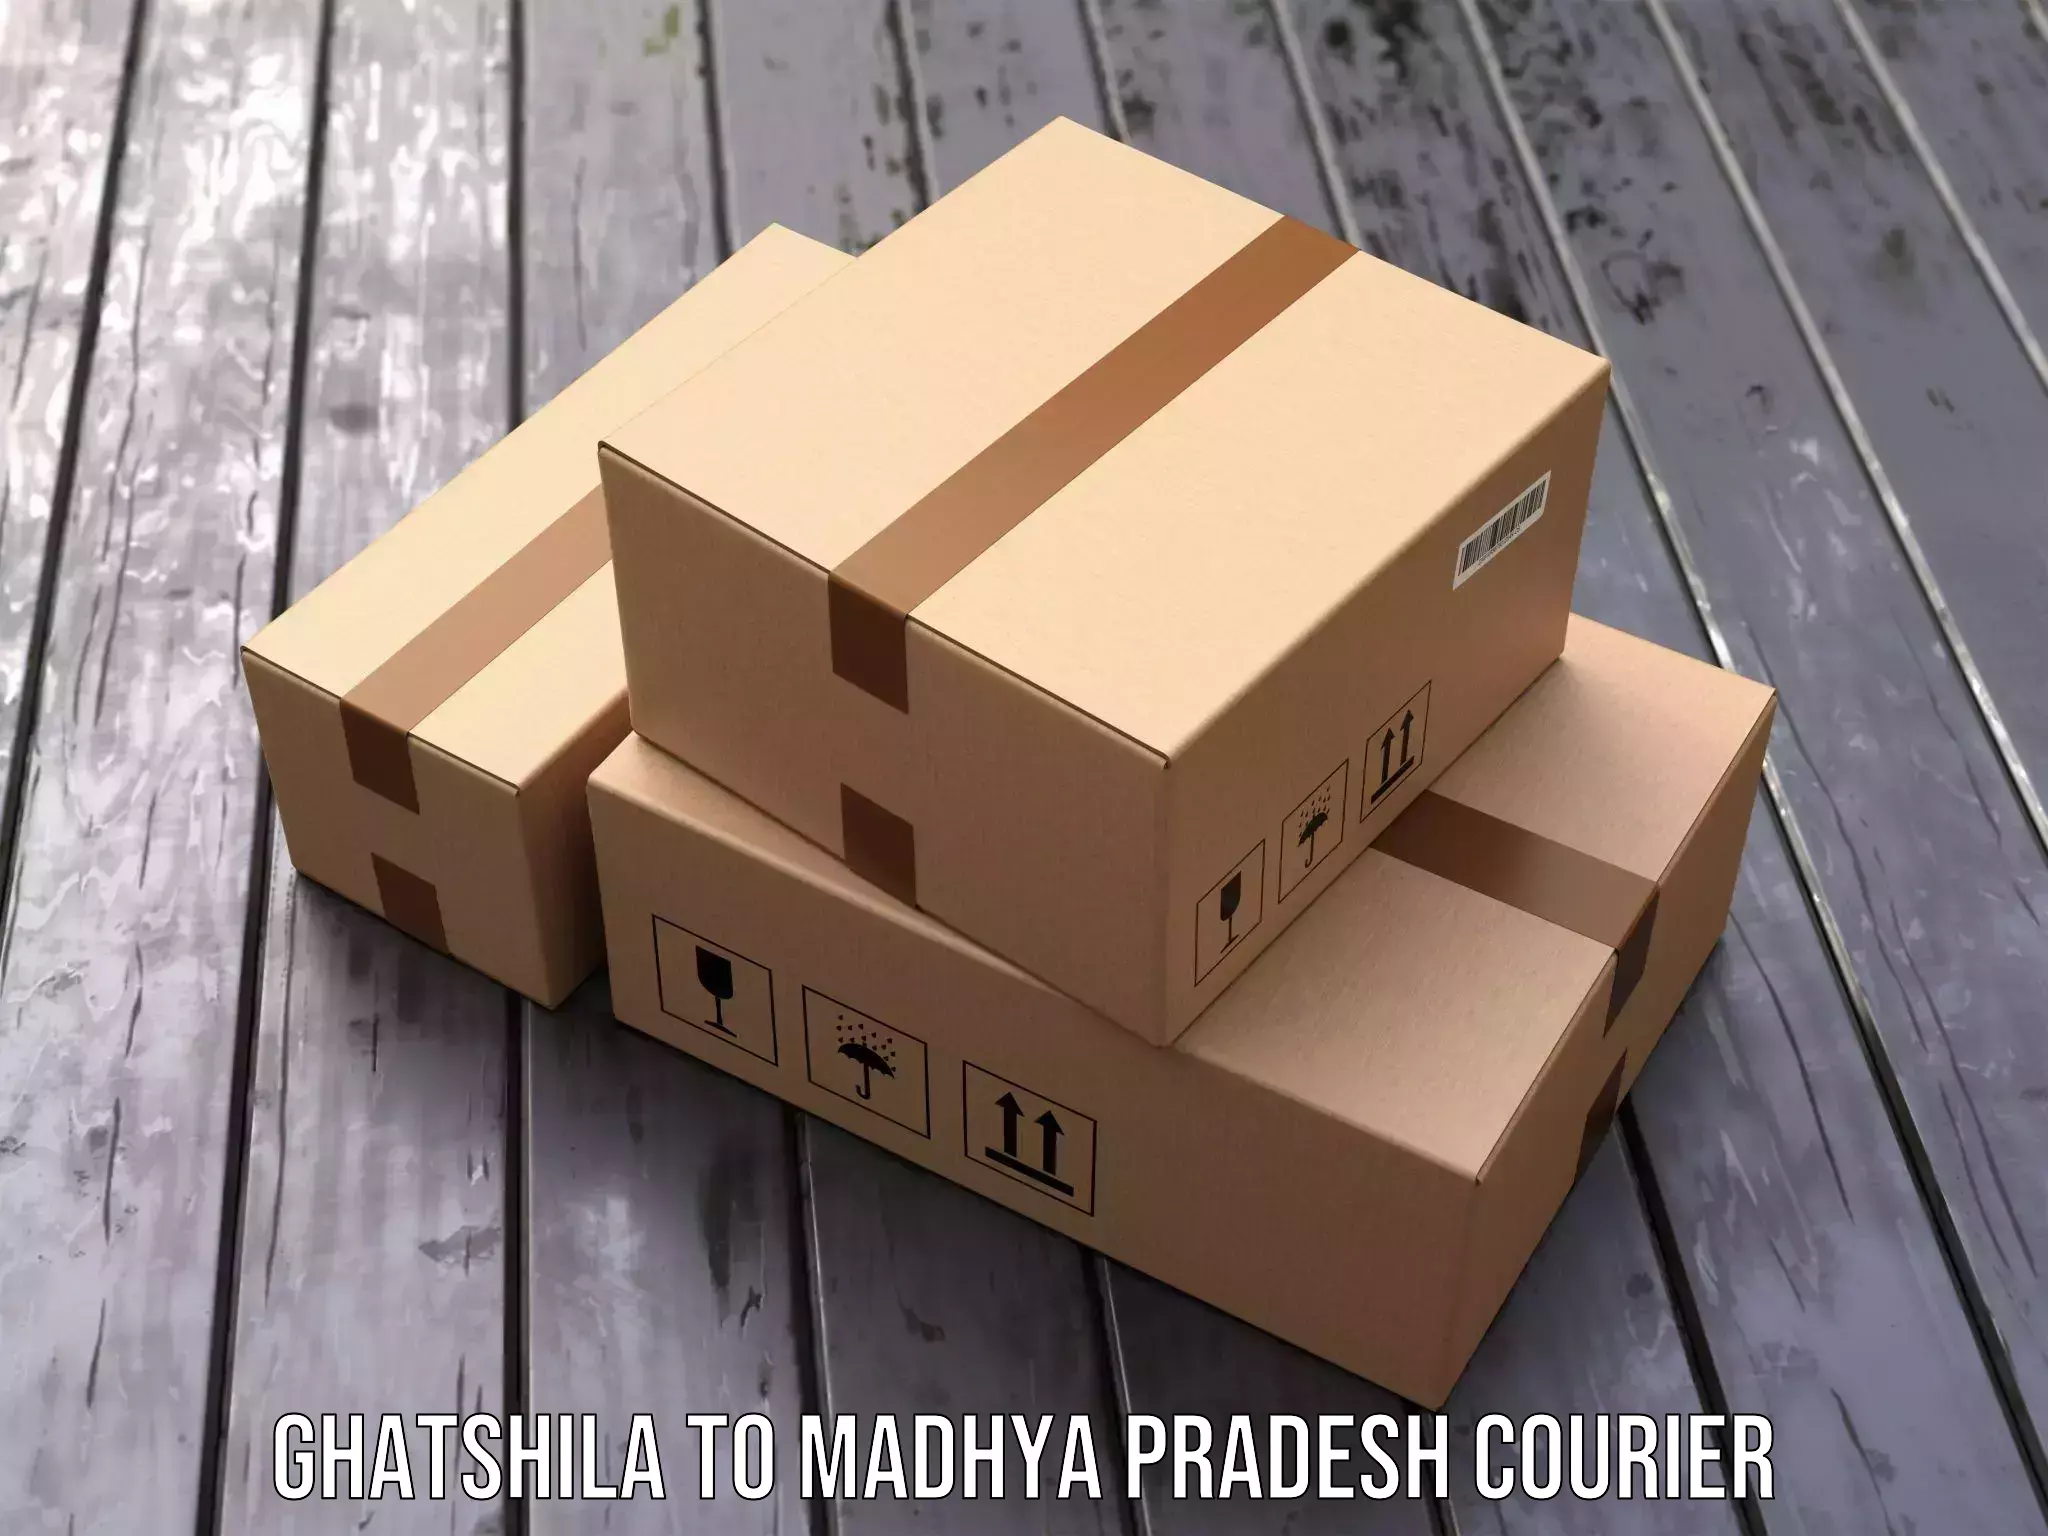 Courier service partnerships Ghatshila to Indore